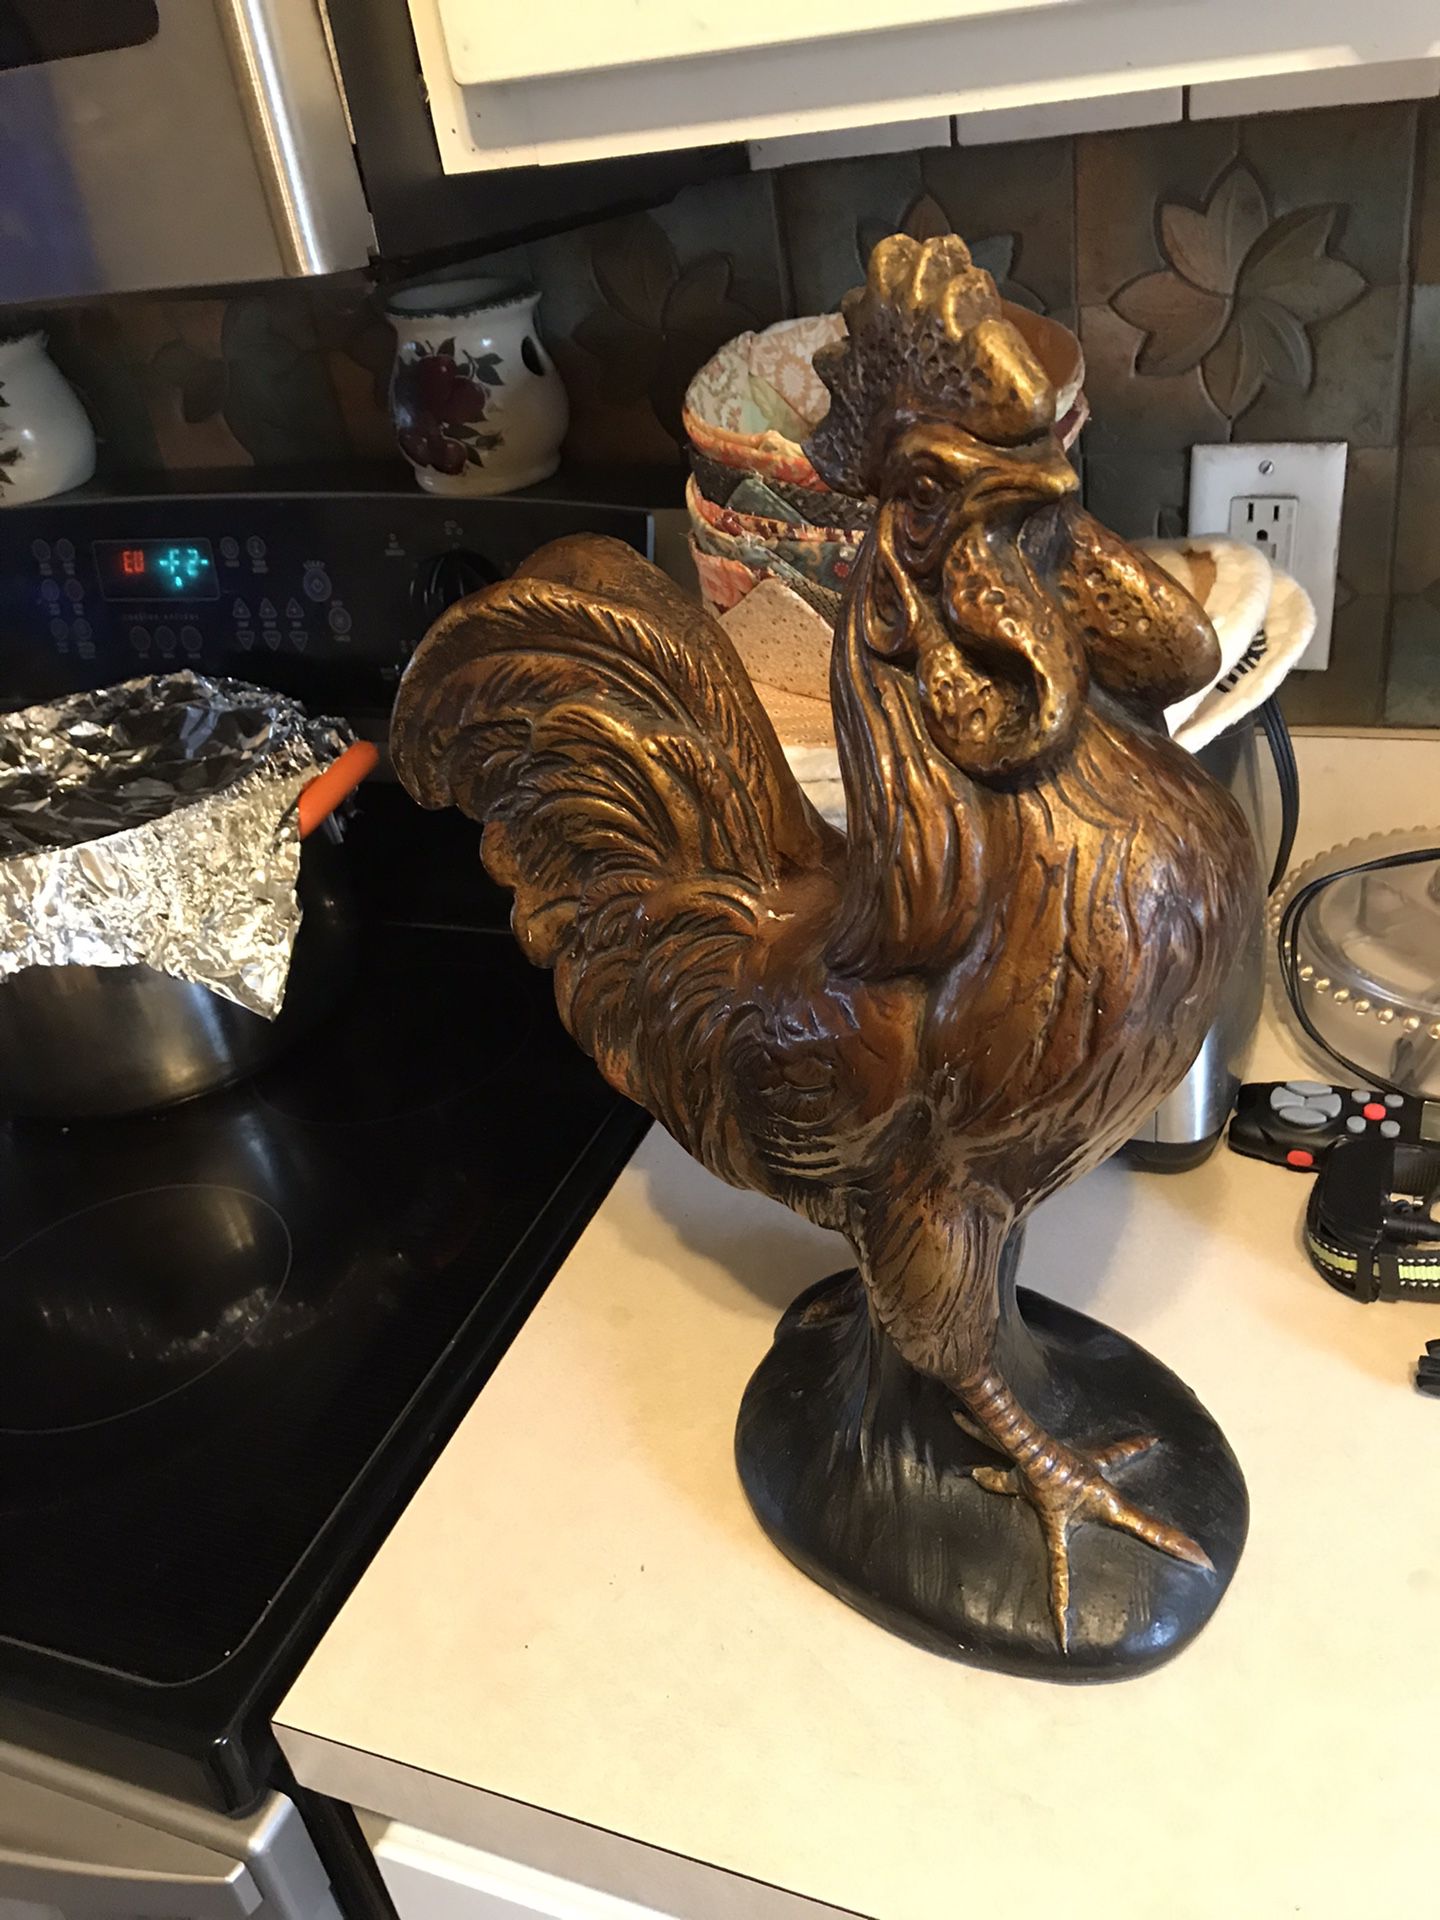 Chicken knickknack in good condition made out of metal